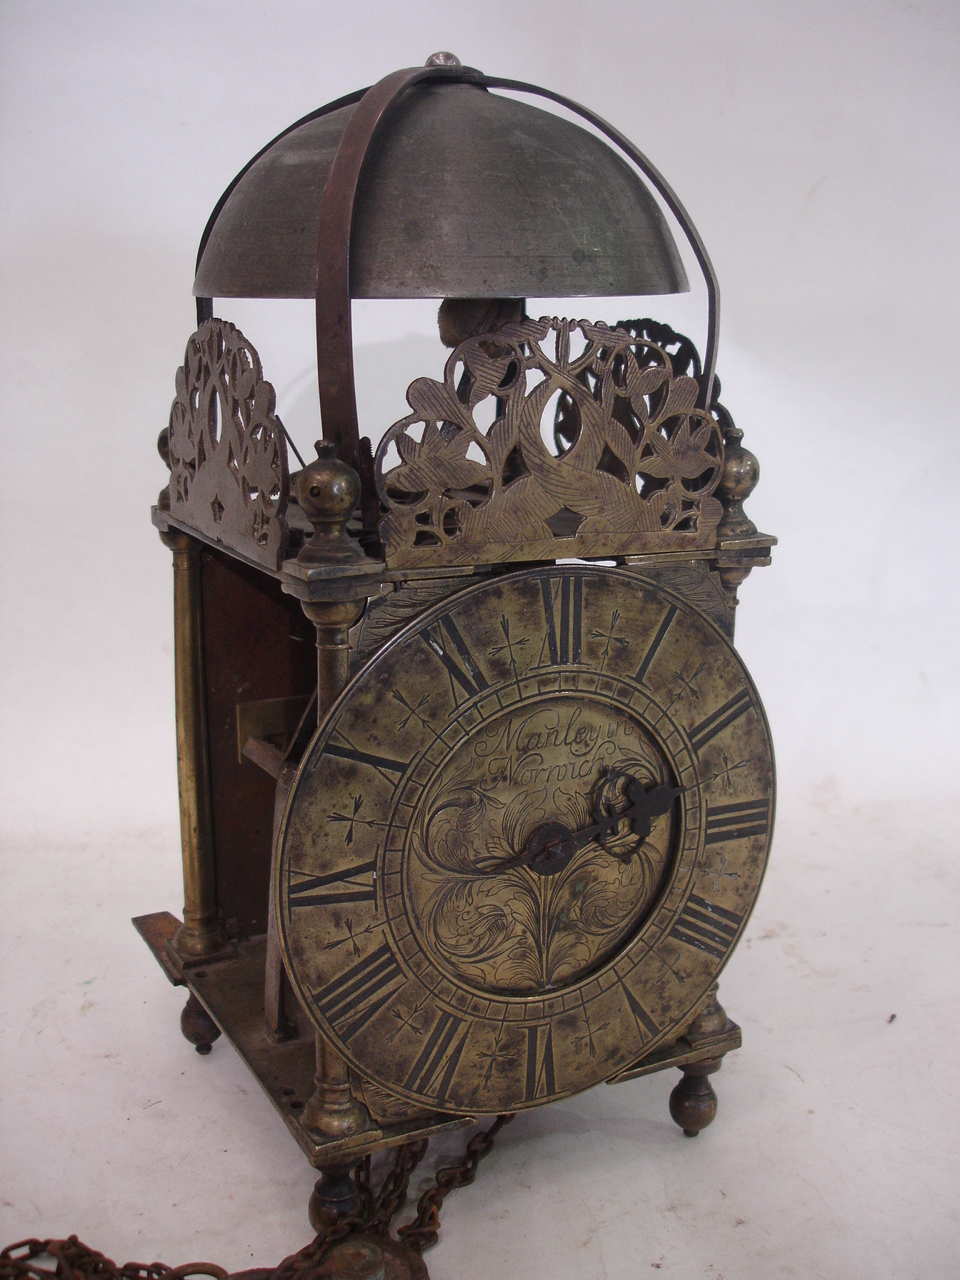 A brass lantern clock, the dial signed Manley in Norwich, the movement with anchor escapement and